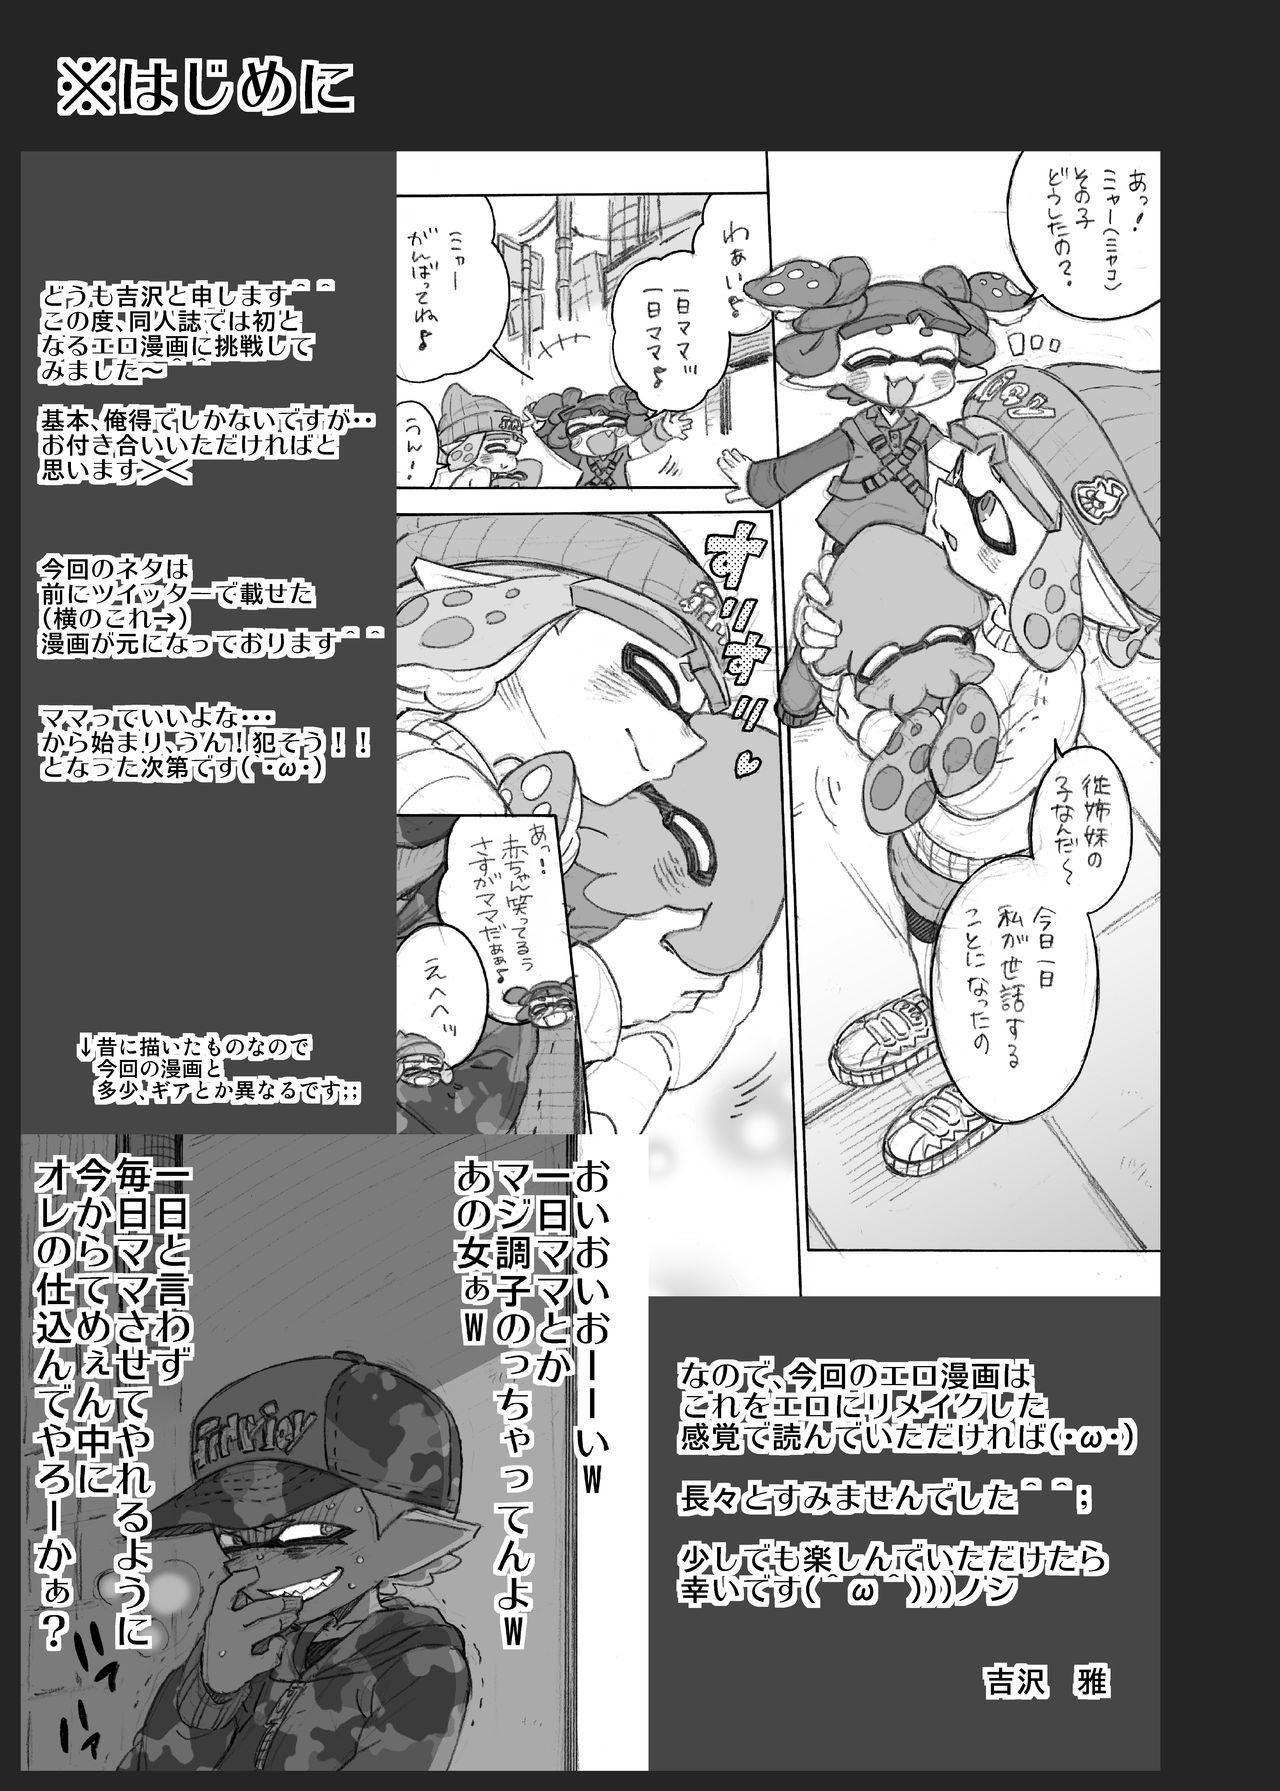 Big Pussy Let's make that anxious daughter a mama - Splatoon Teenpussy - Page 2